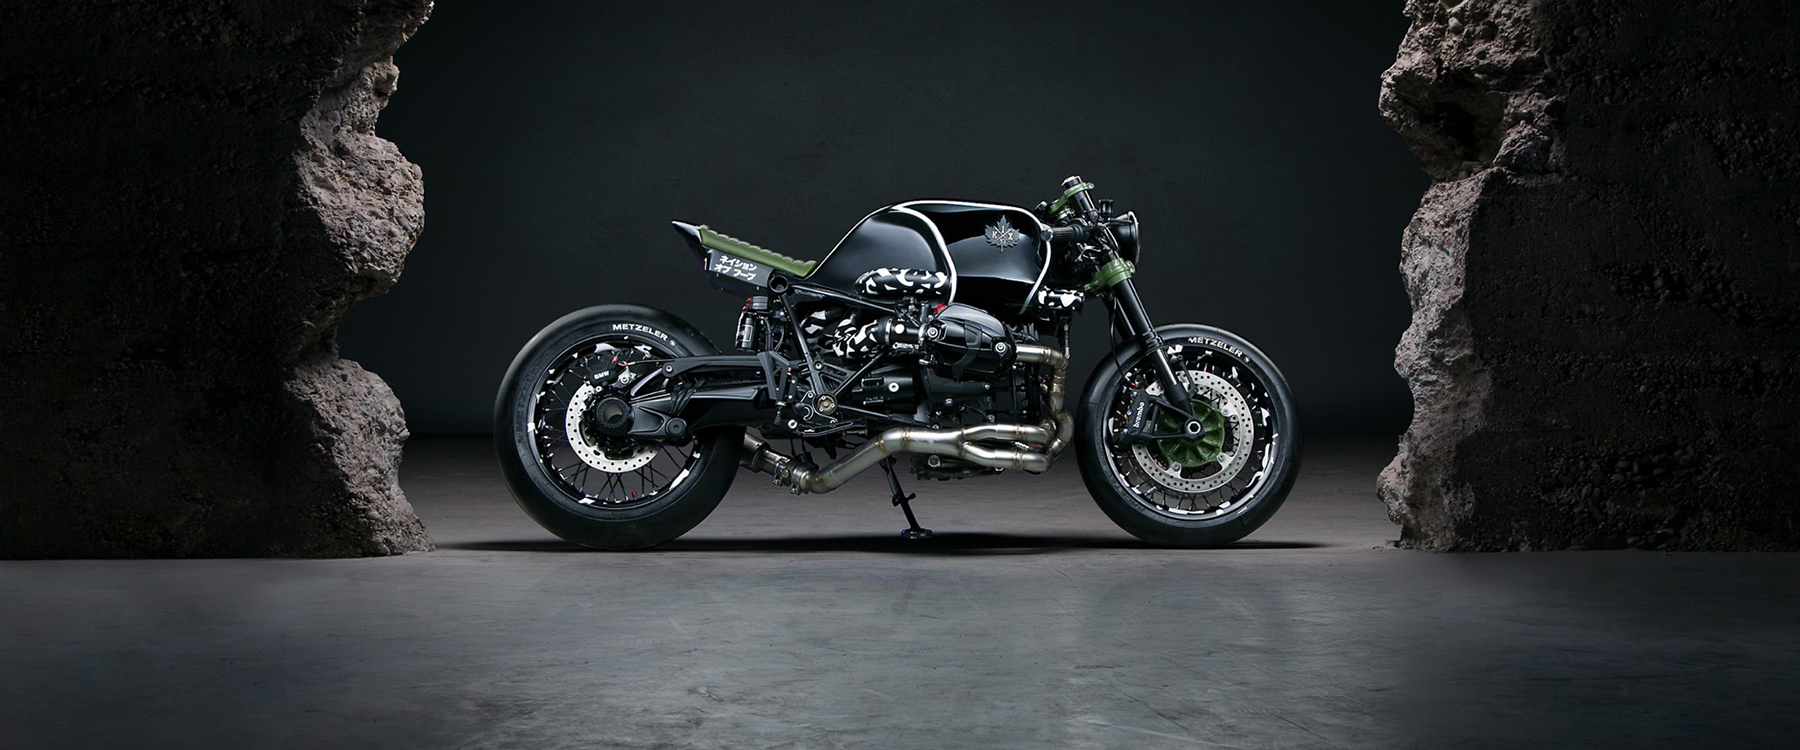 two munich firms create custom BMW motorcycle with camouflage detailing